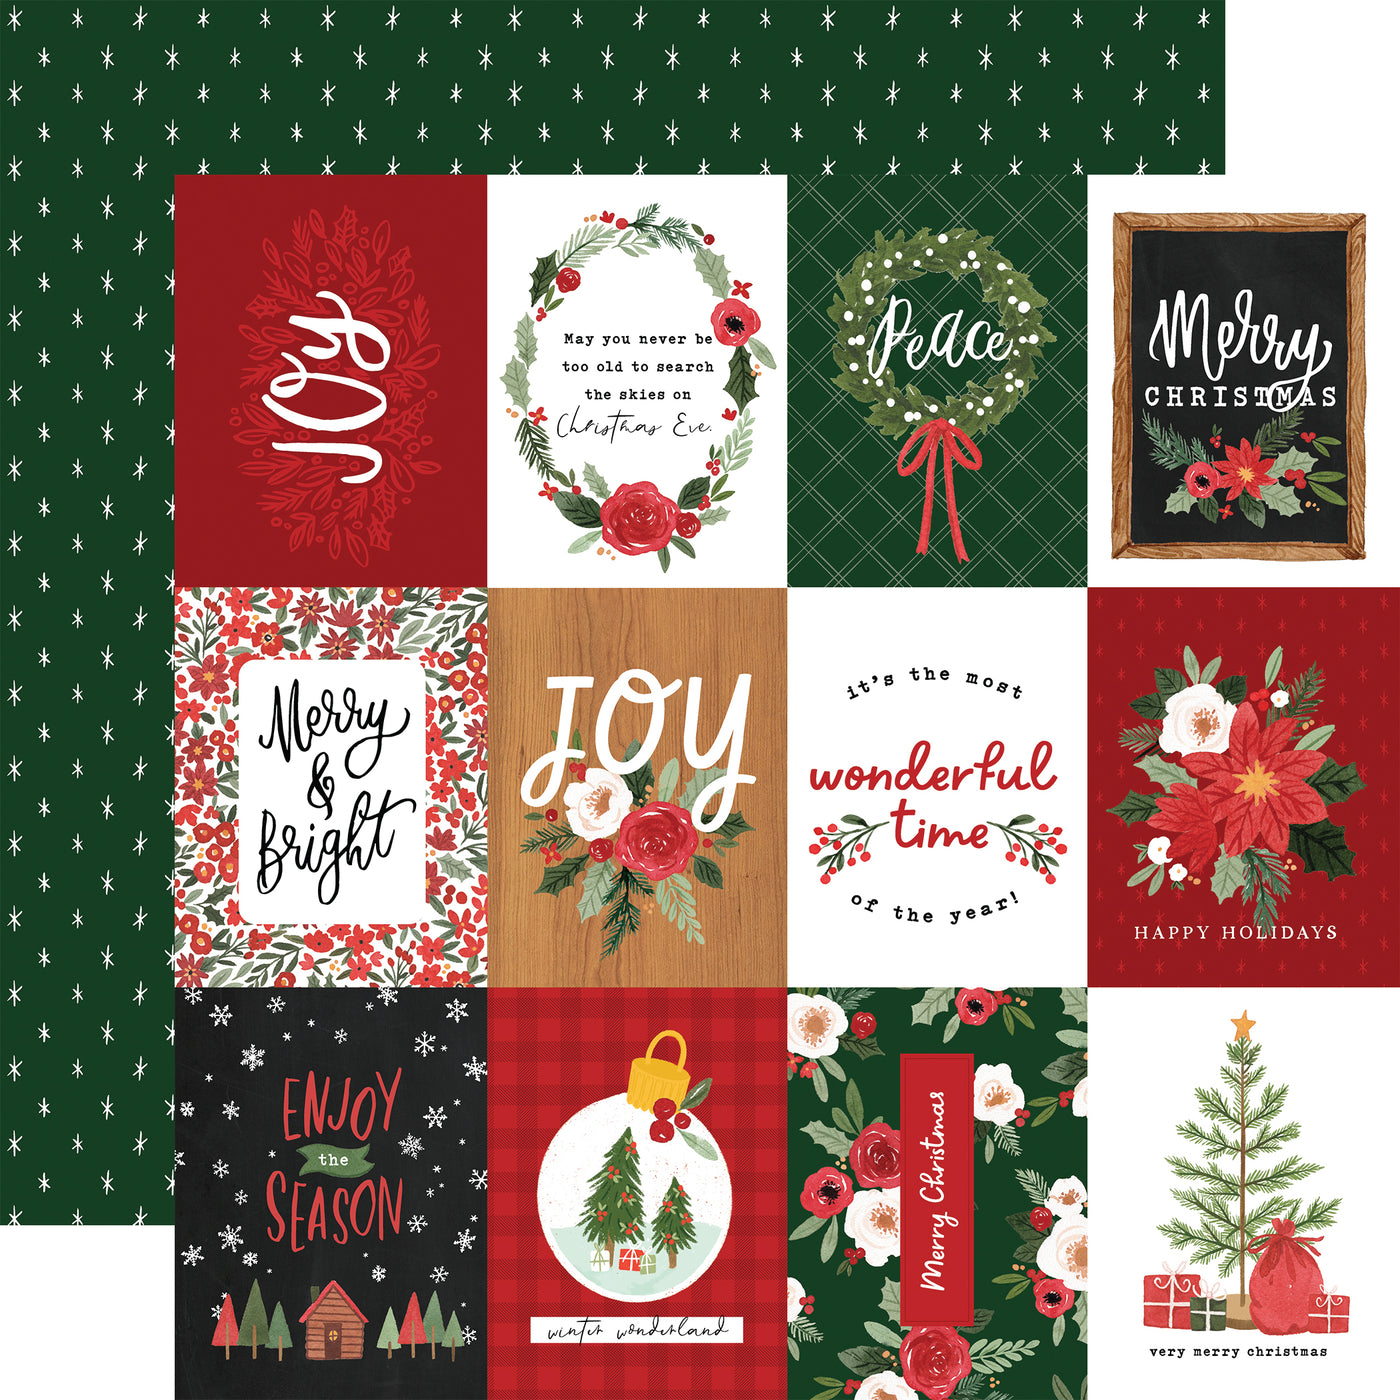 Happy Christmas Collection 3x4 jounaling cards.